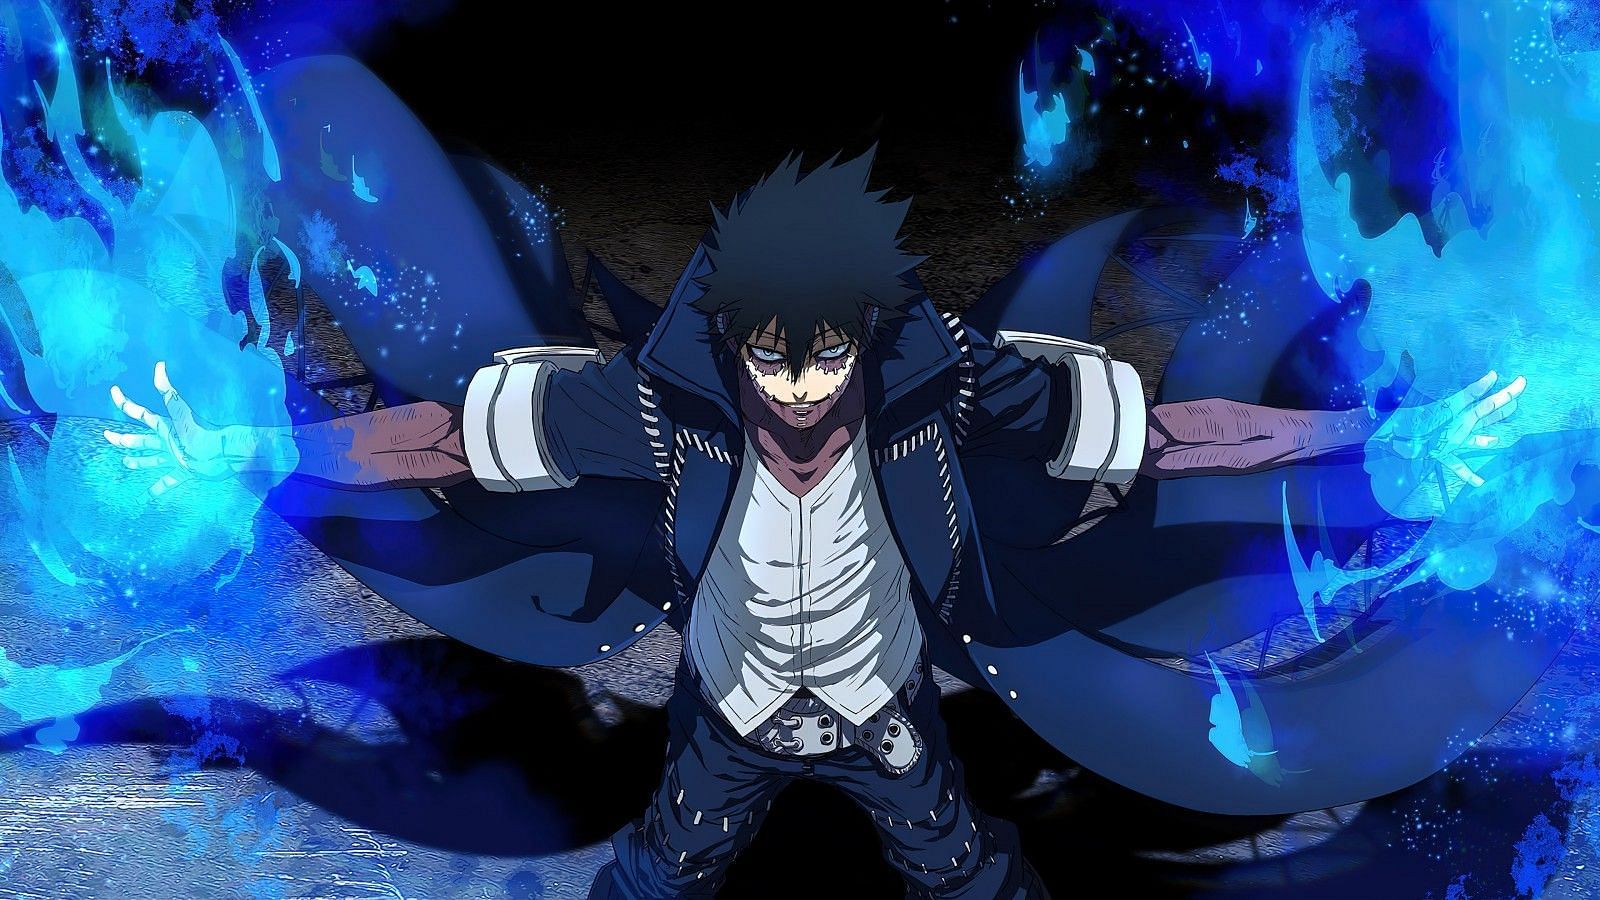 Who is Dabi in My Hero Academia?